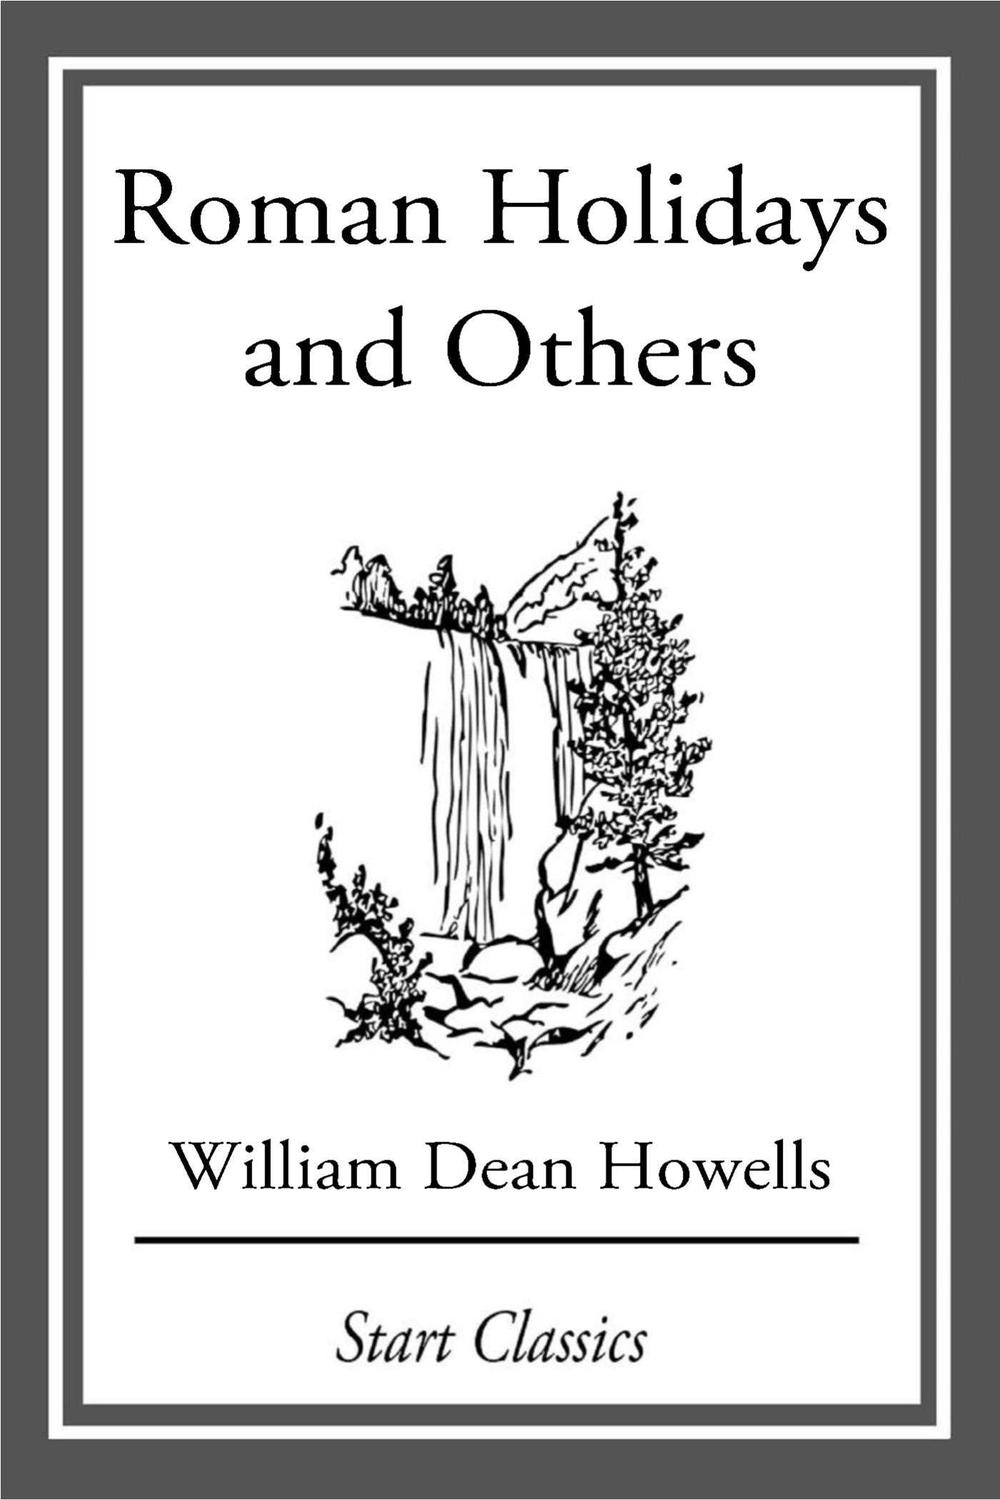 Roman Holidays and Others - William Dean Howells